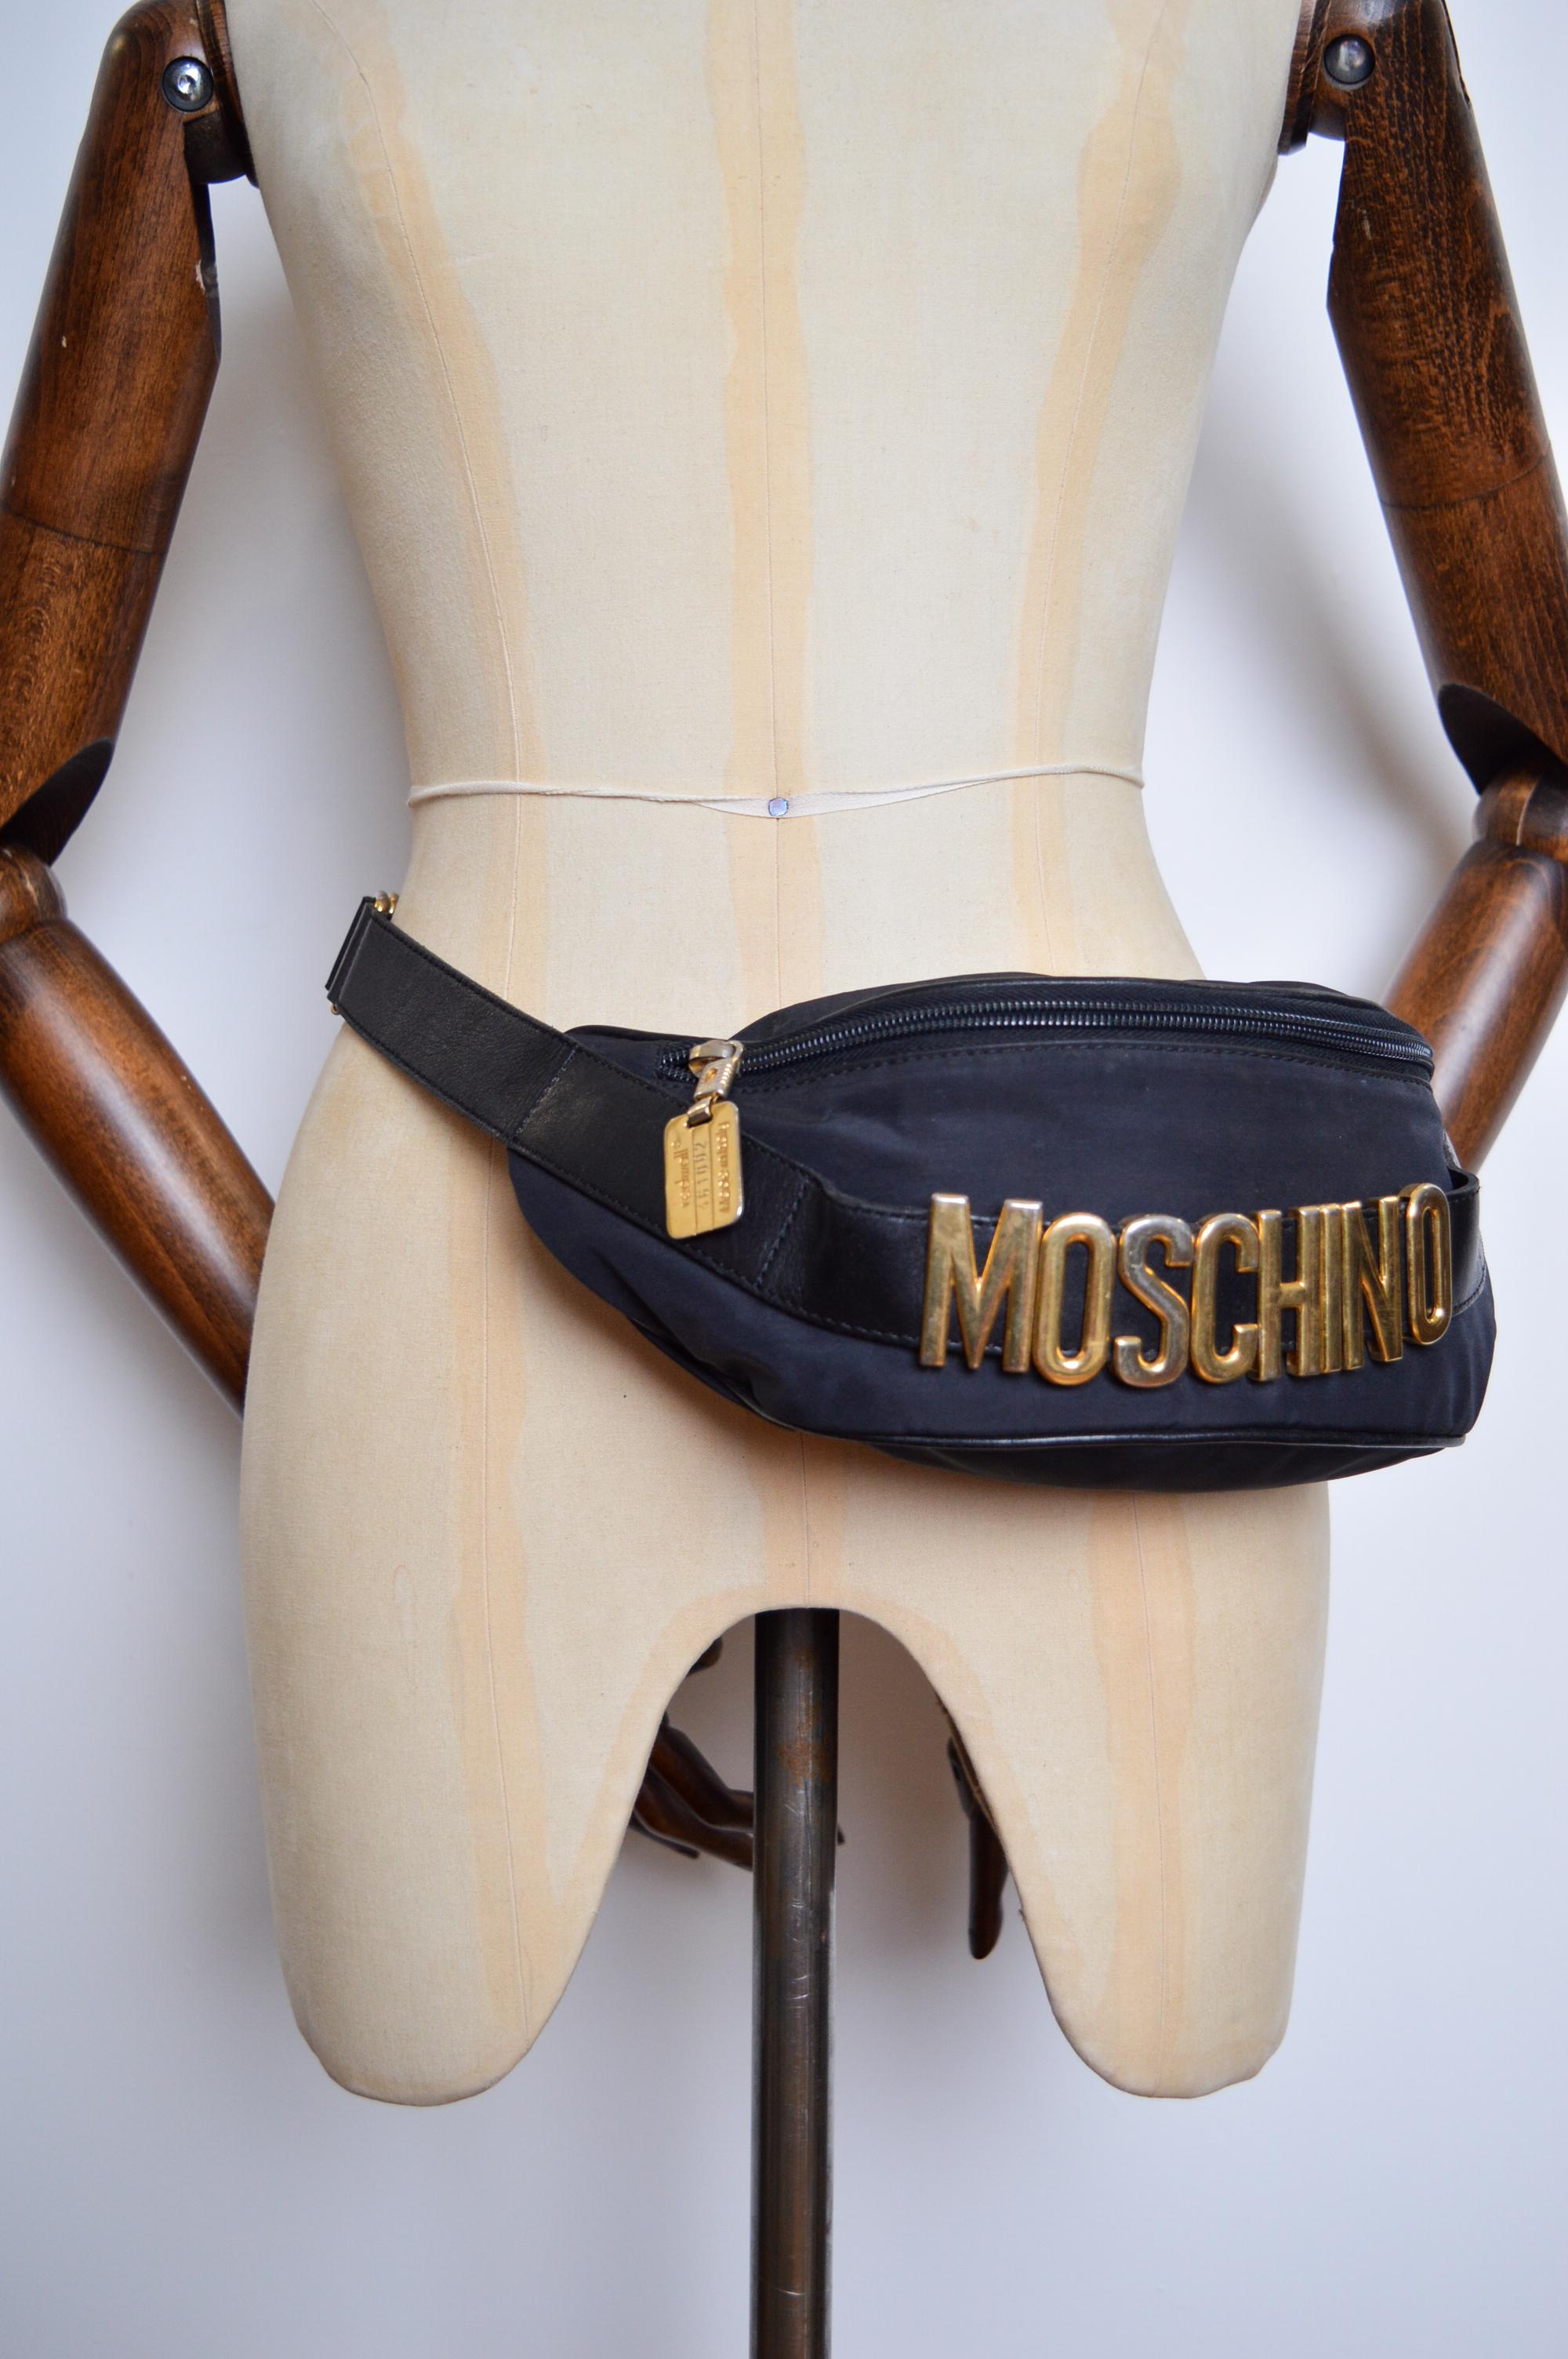 1990's Moschino Gold letter spell out Fanny Pack Black & Gold Bum Bag en vente 3